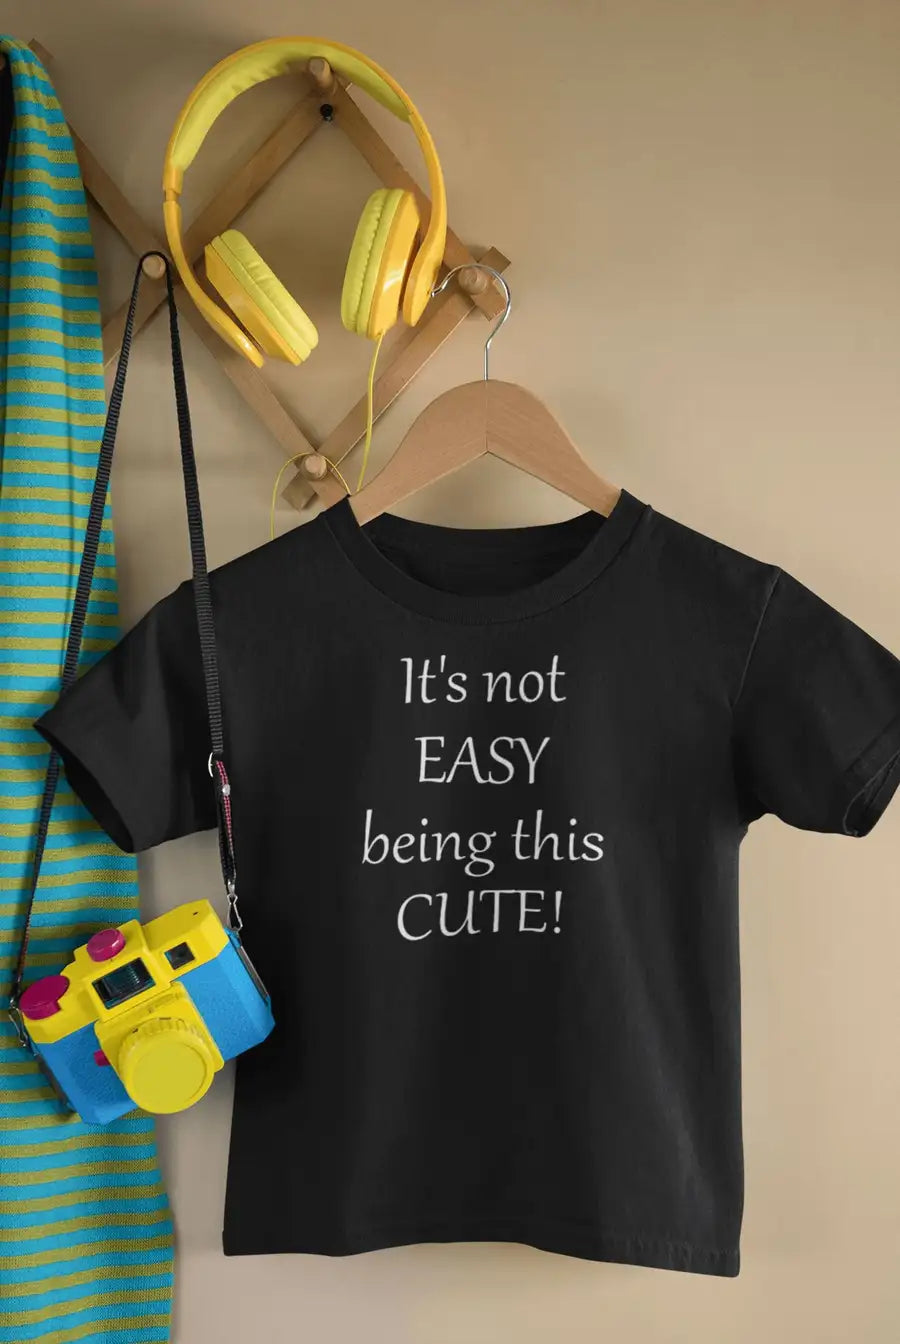 It's Not Easy Being This Cute Premium T Shirt for Toddlers | Premium Design | Catch My Drift India - Catch My Drift India Clothing babies, baby, kids, onesie, onesies, toddlers